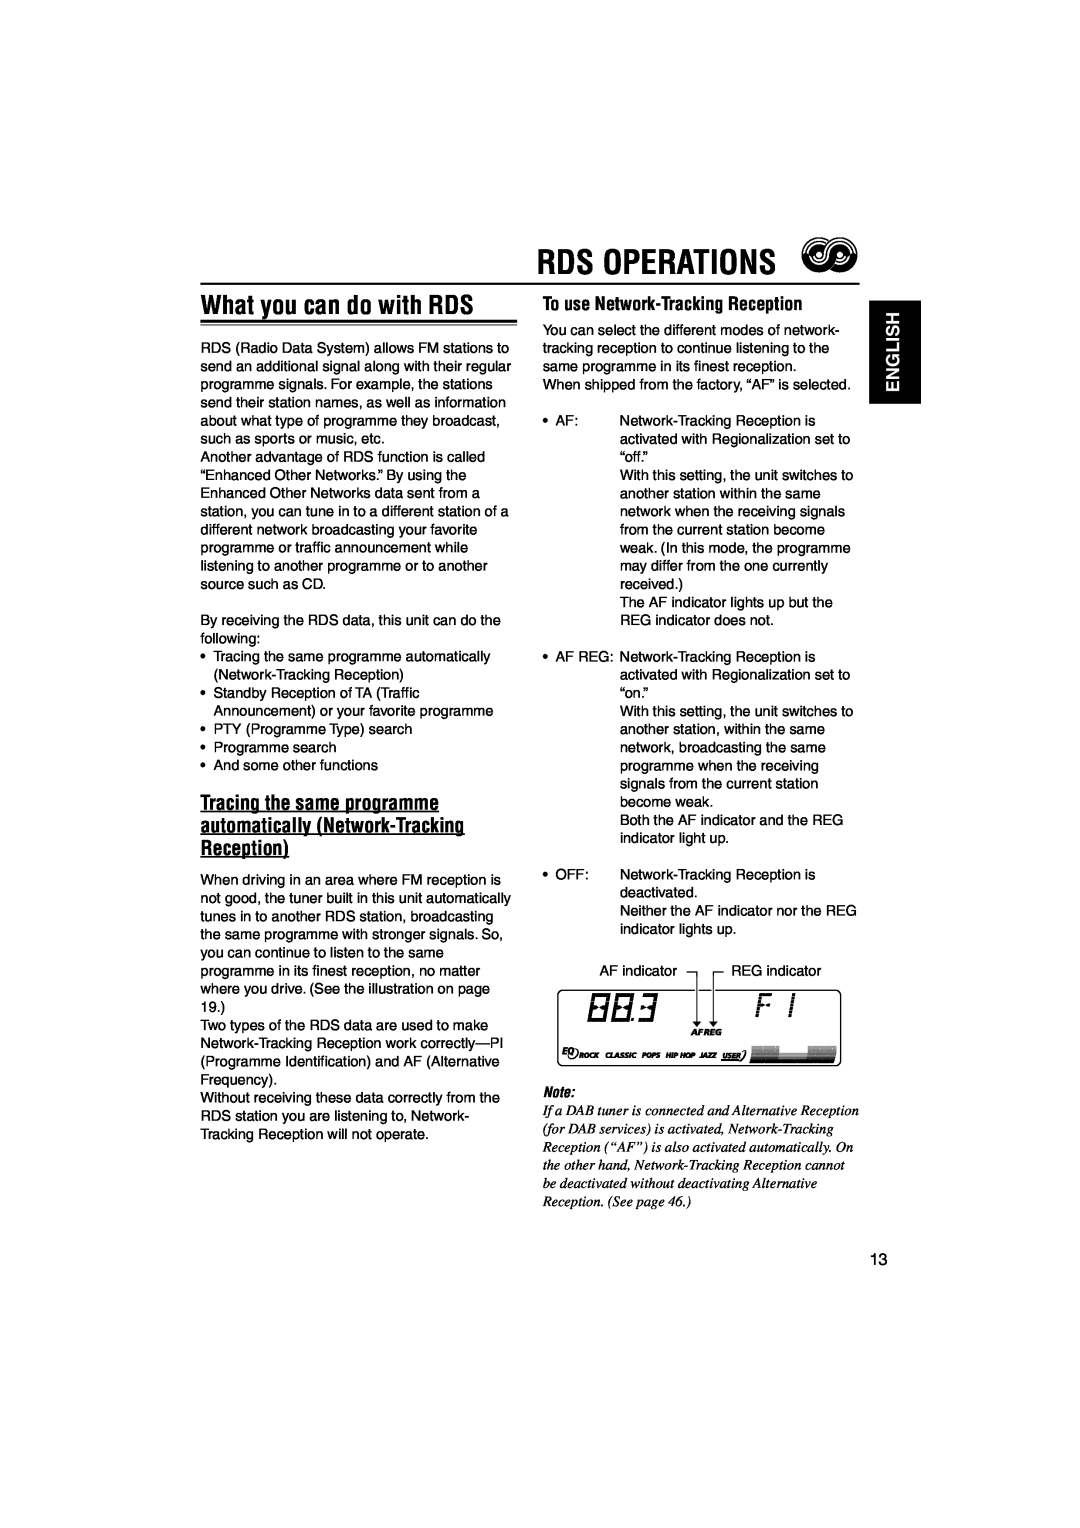 JVC GET0126-001A manual Rds Operations, What you can do with RDS, To use Network-Tracking Reception, English 